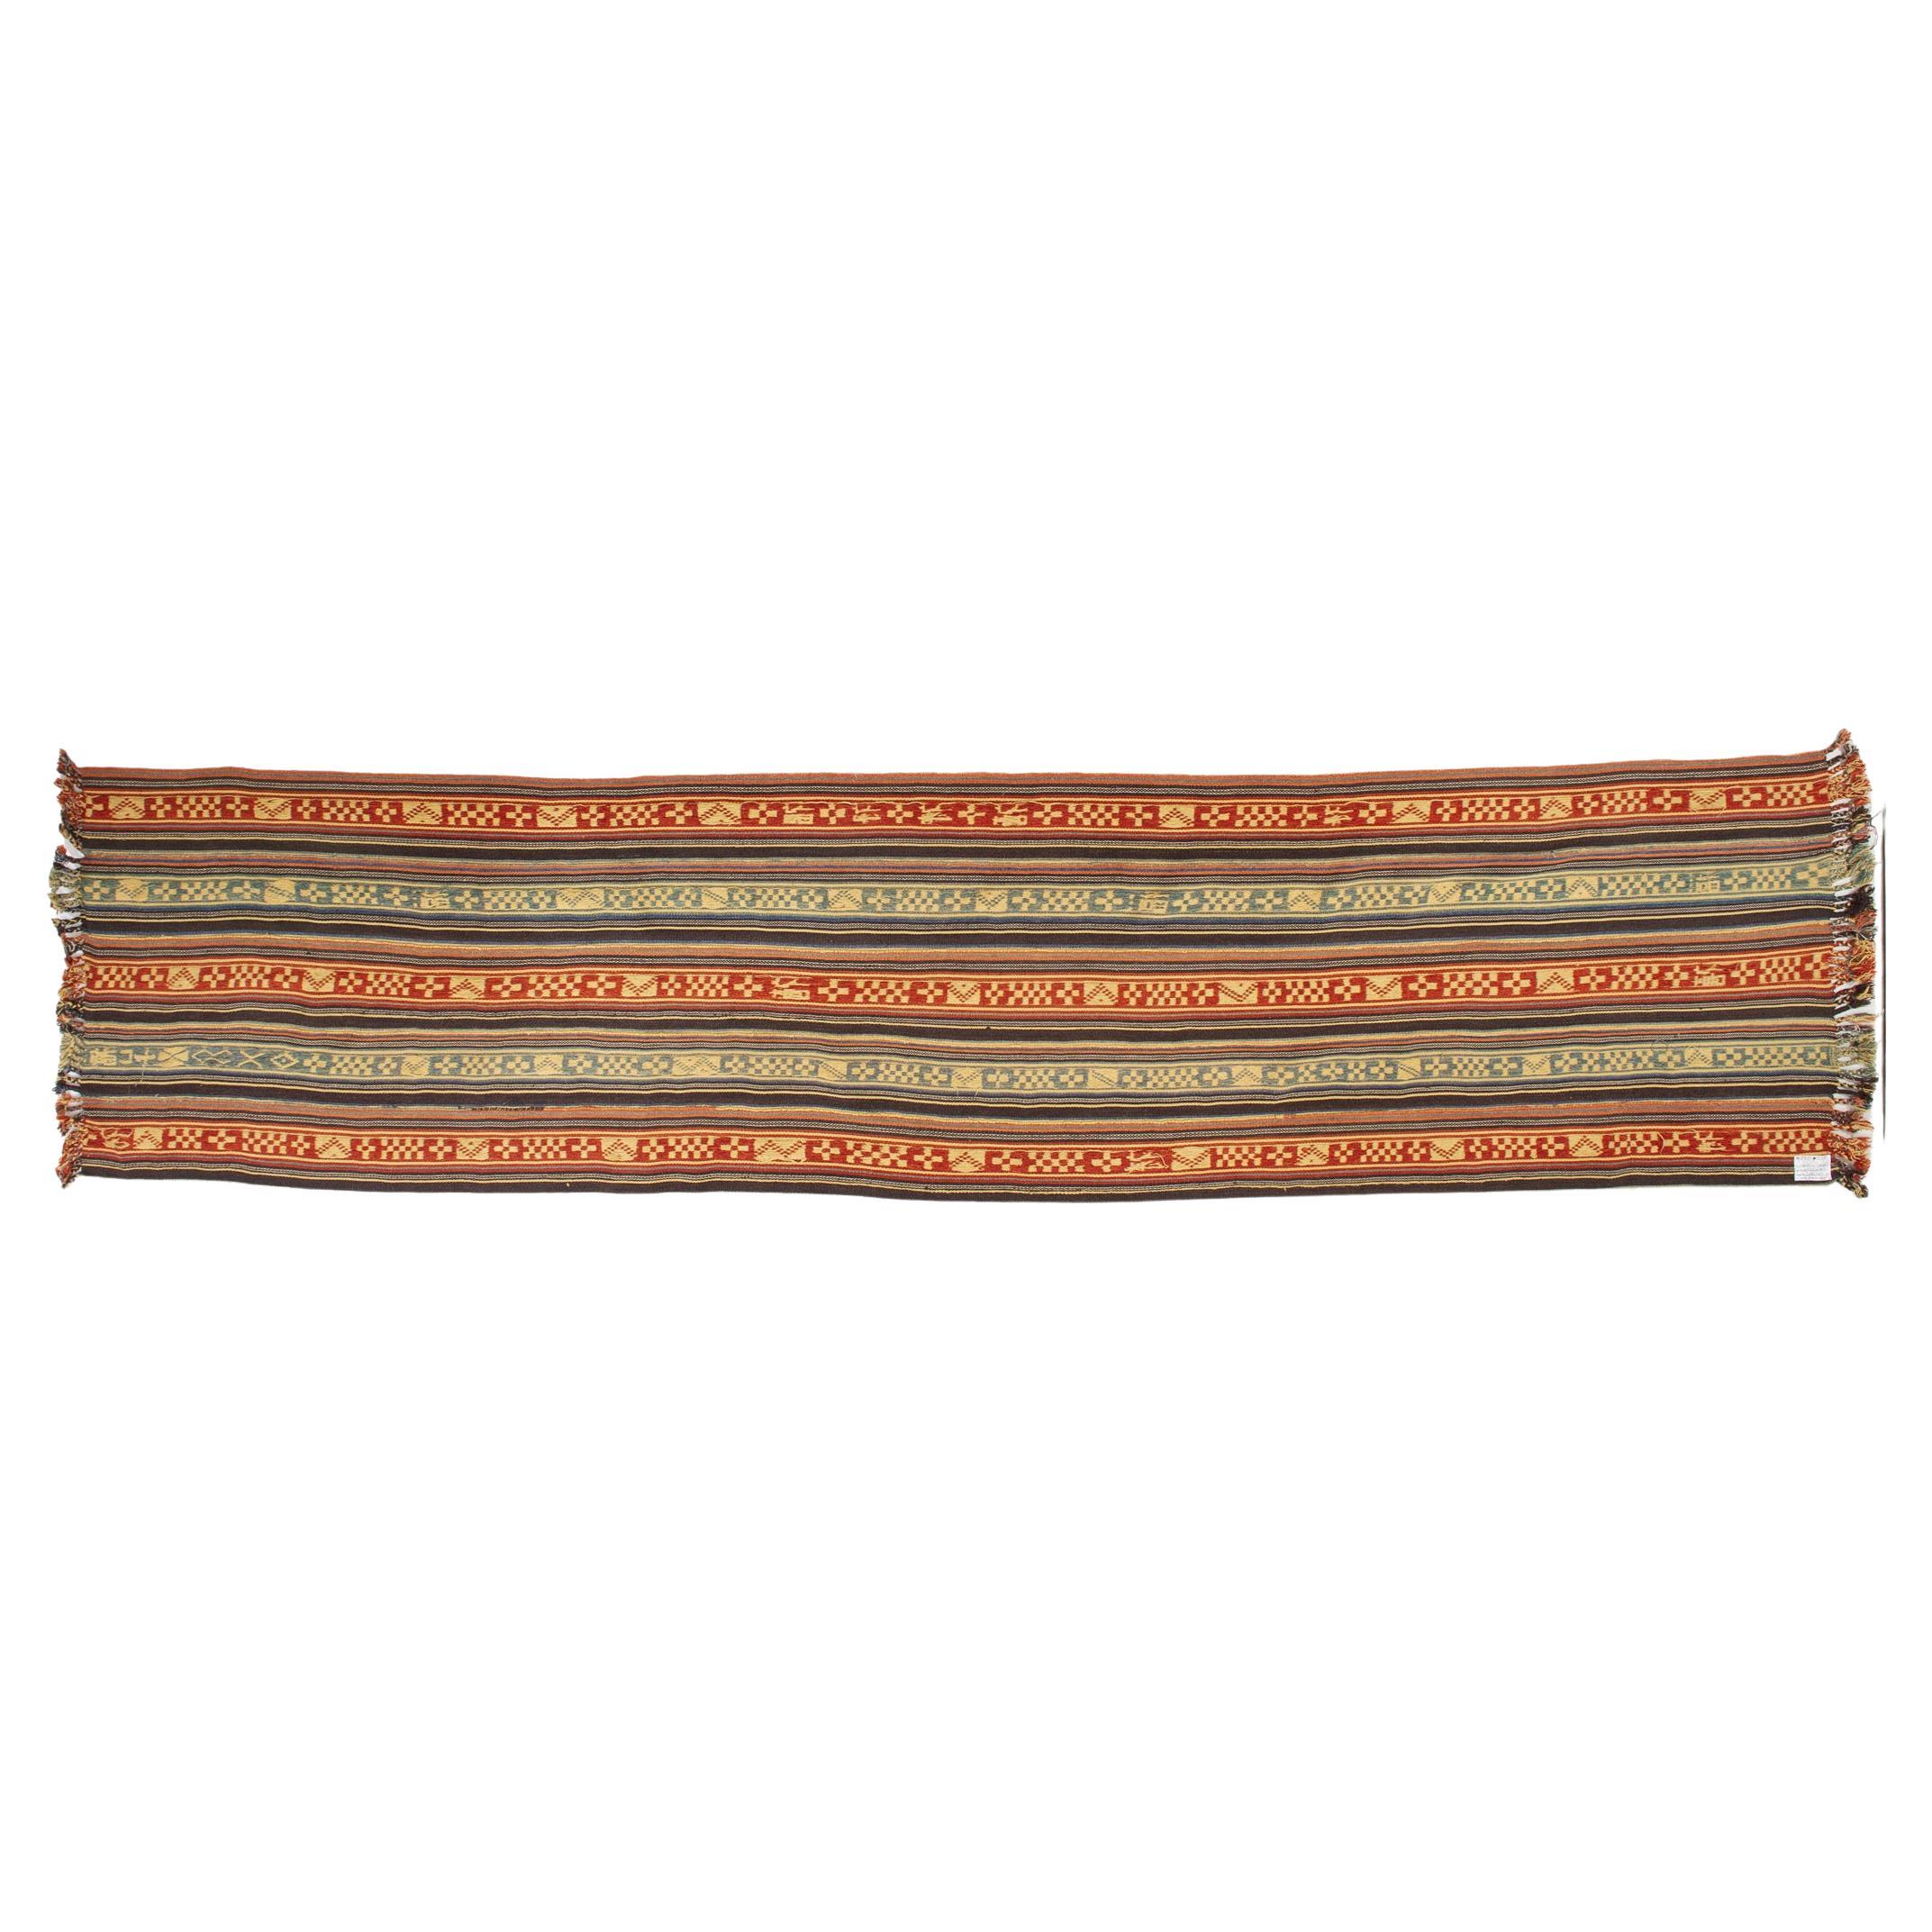 Very interesting this vintage Mongolian kilim: It's made up of stripes in pastel colors joined togheter.
The dense geometric pattern is arranged along the lenght of the kilim.